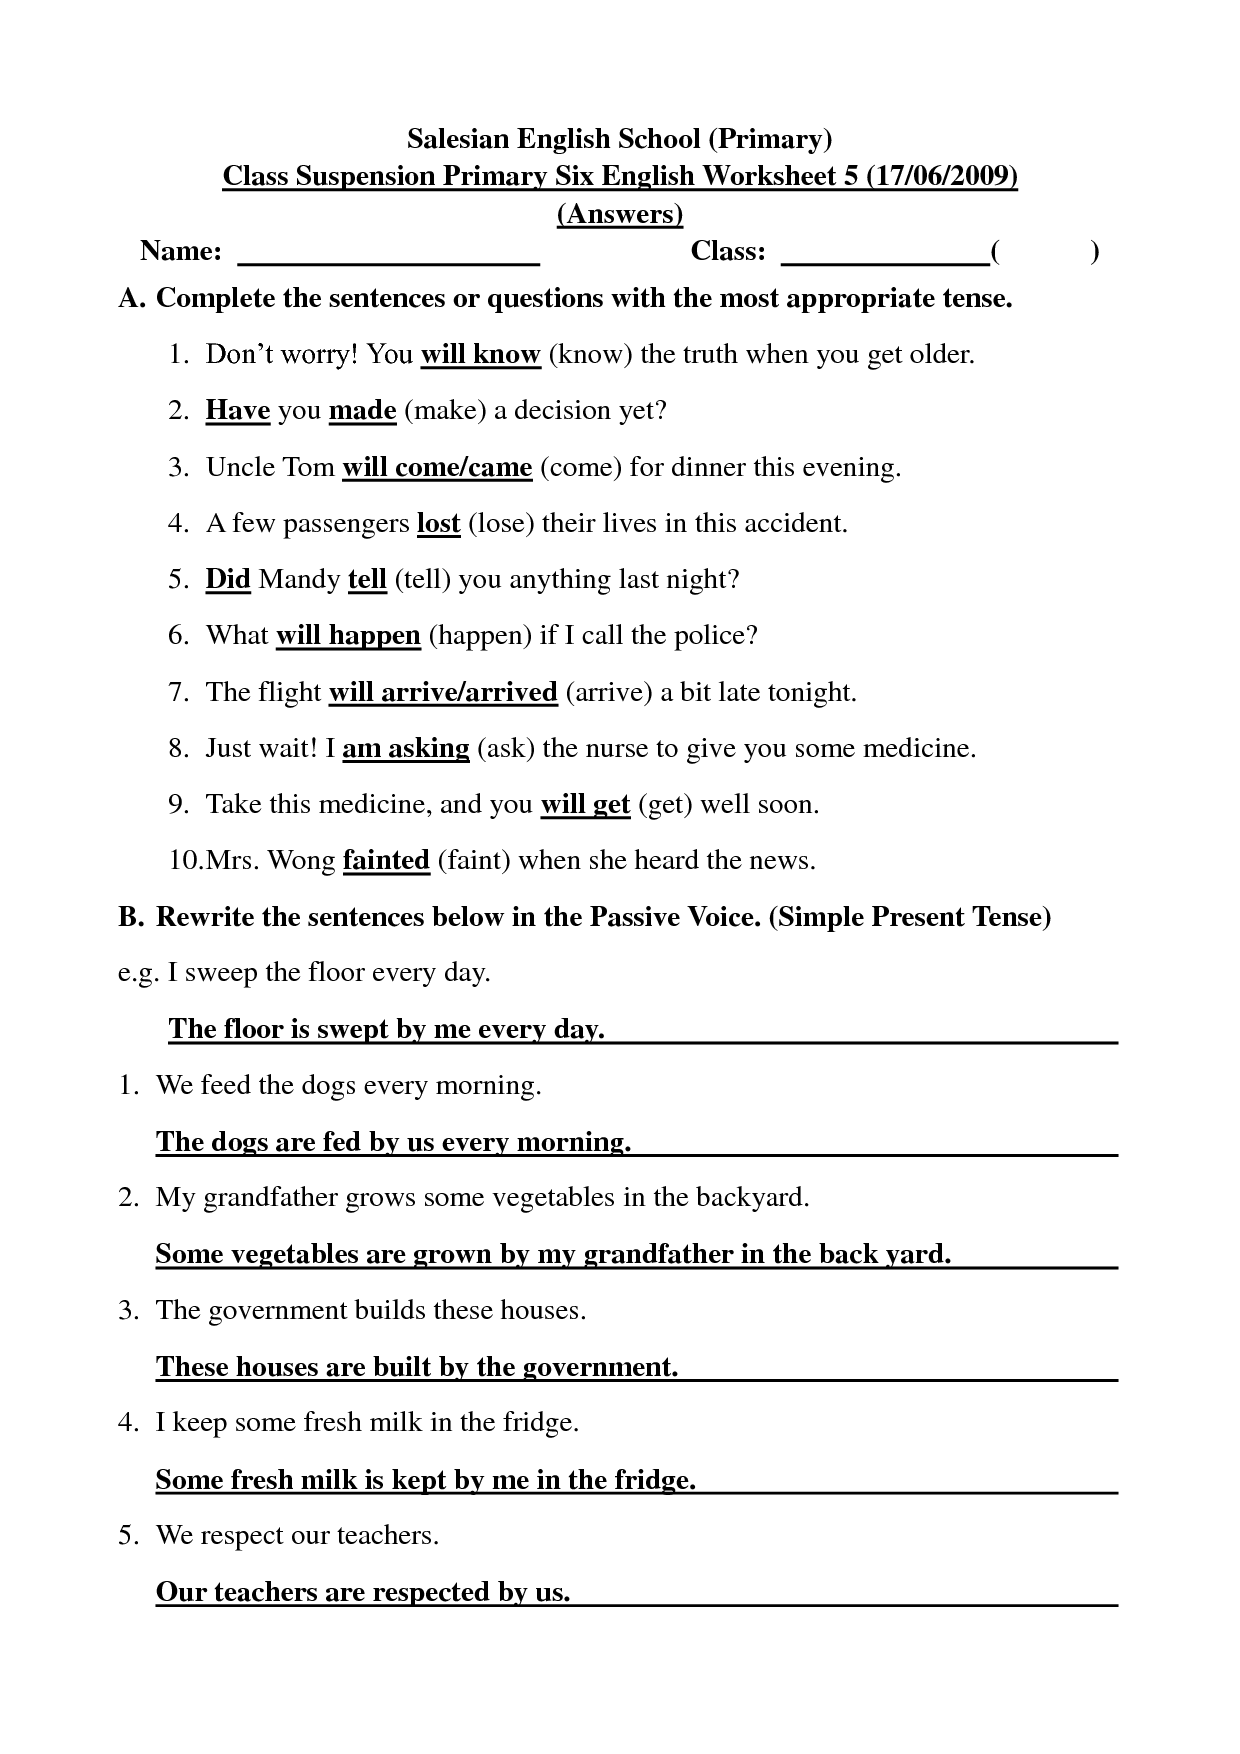 16-best-images-of-english-4-worksheets-free-english-free-counting-up-to-20-worksheets-for